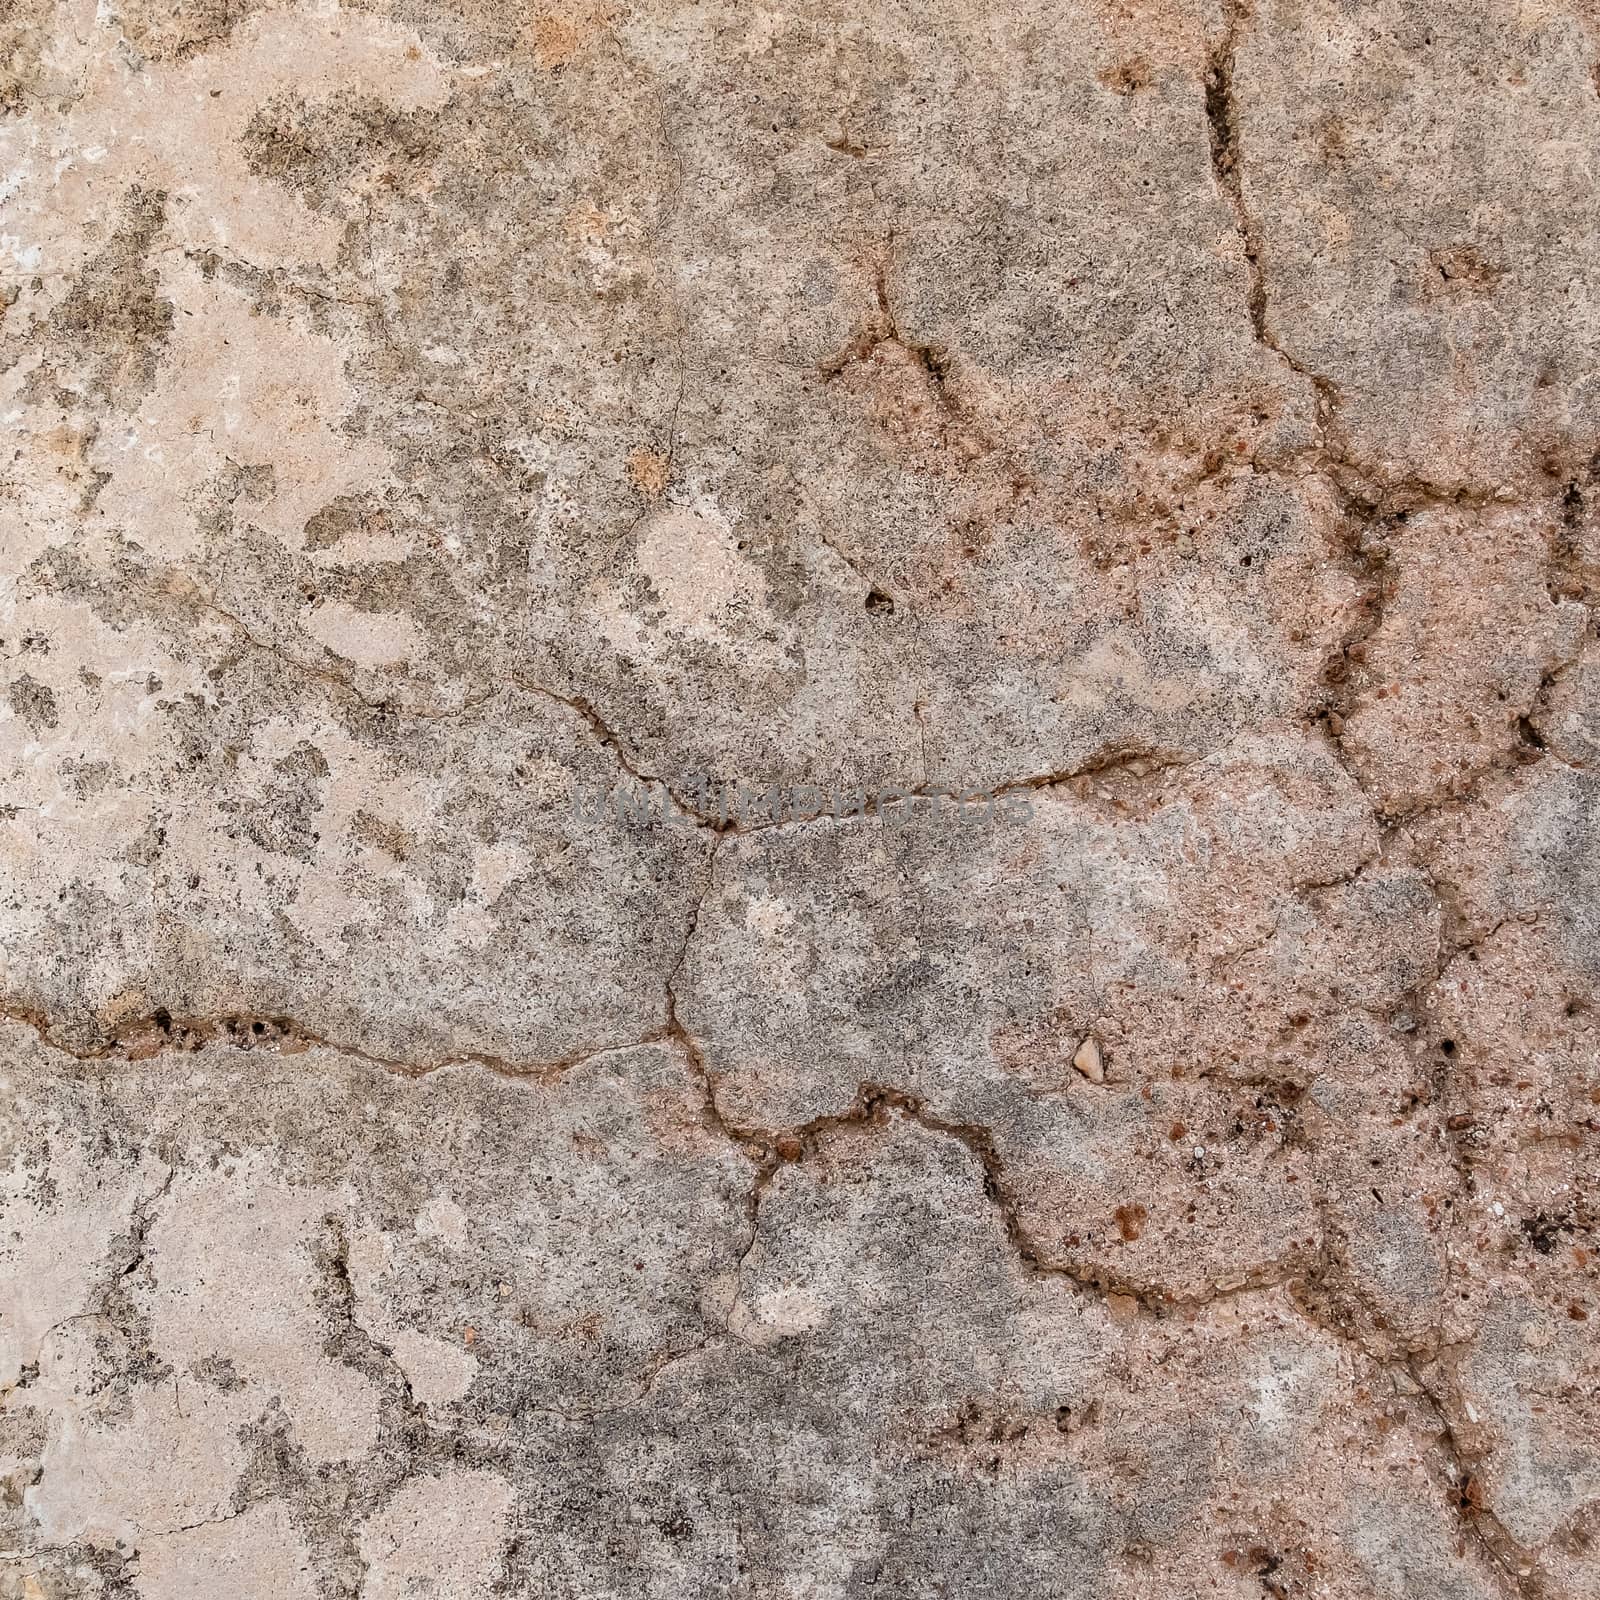 Rough stone texture background. Material construction and architectural detail.